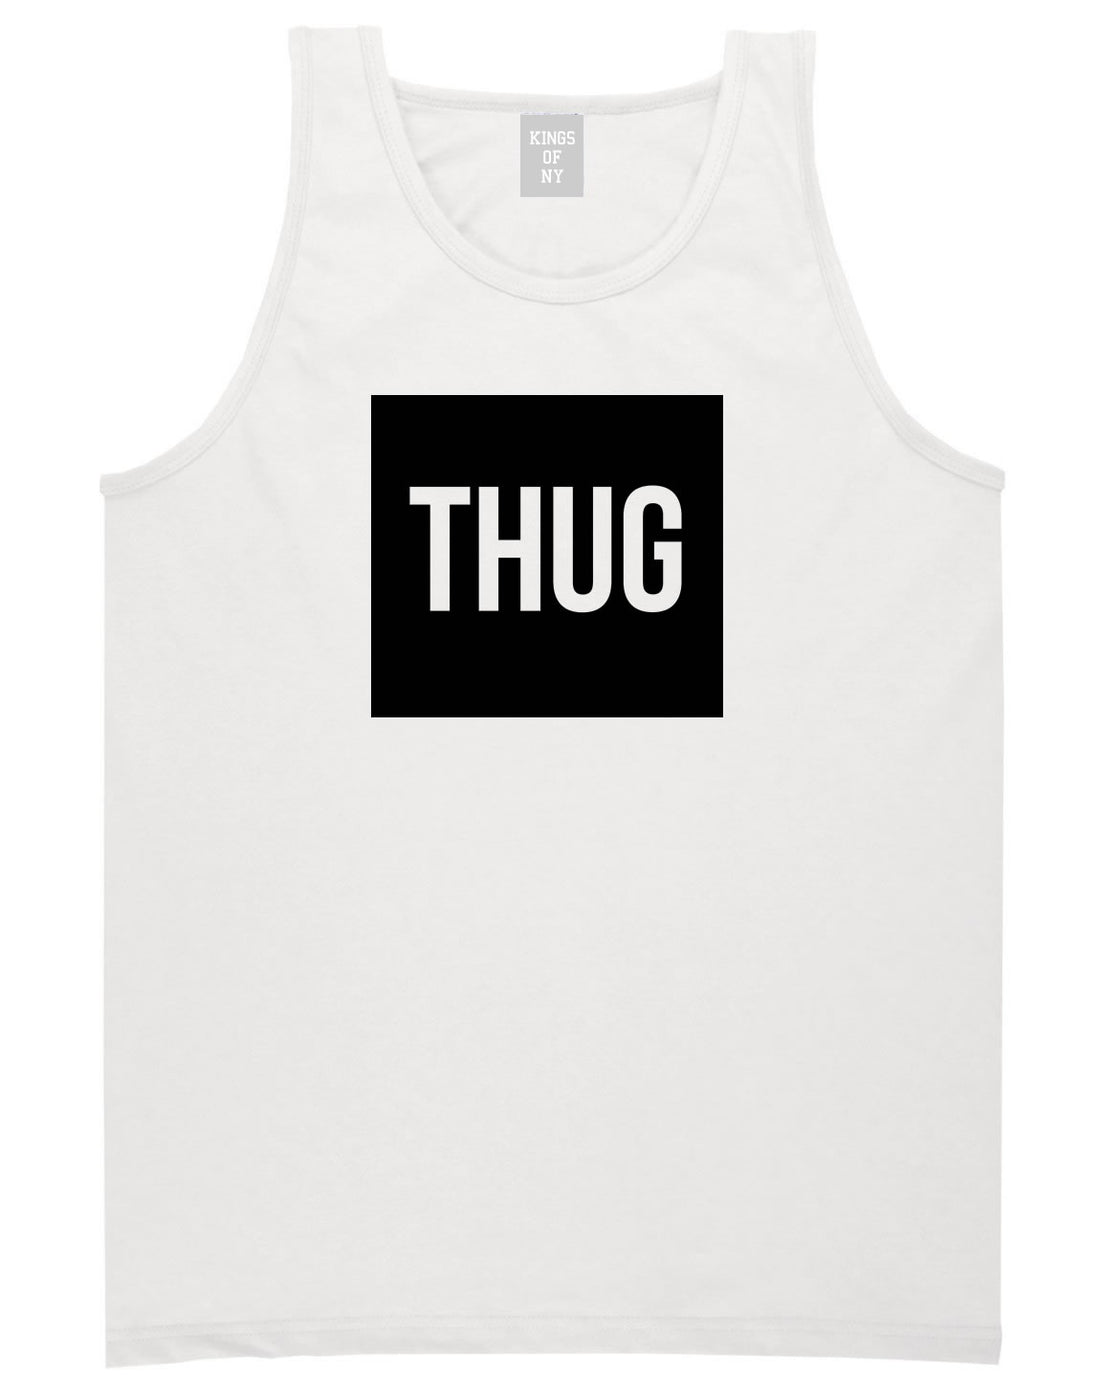 Thug Gangsta Box Logo Tank Top in White by Kings Of NY